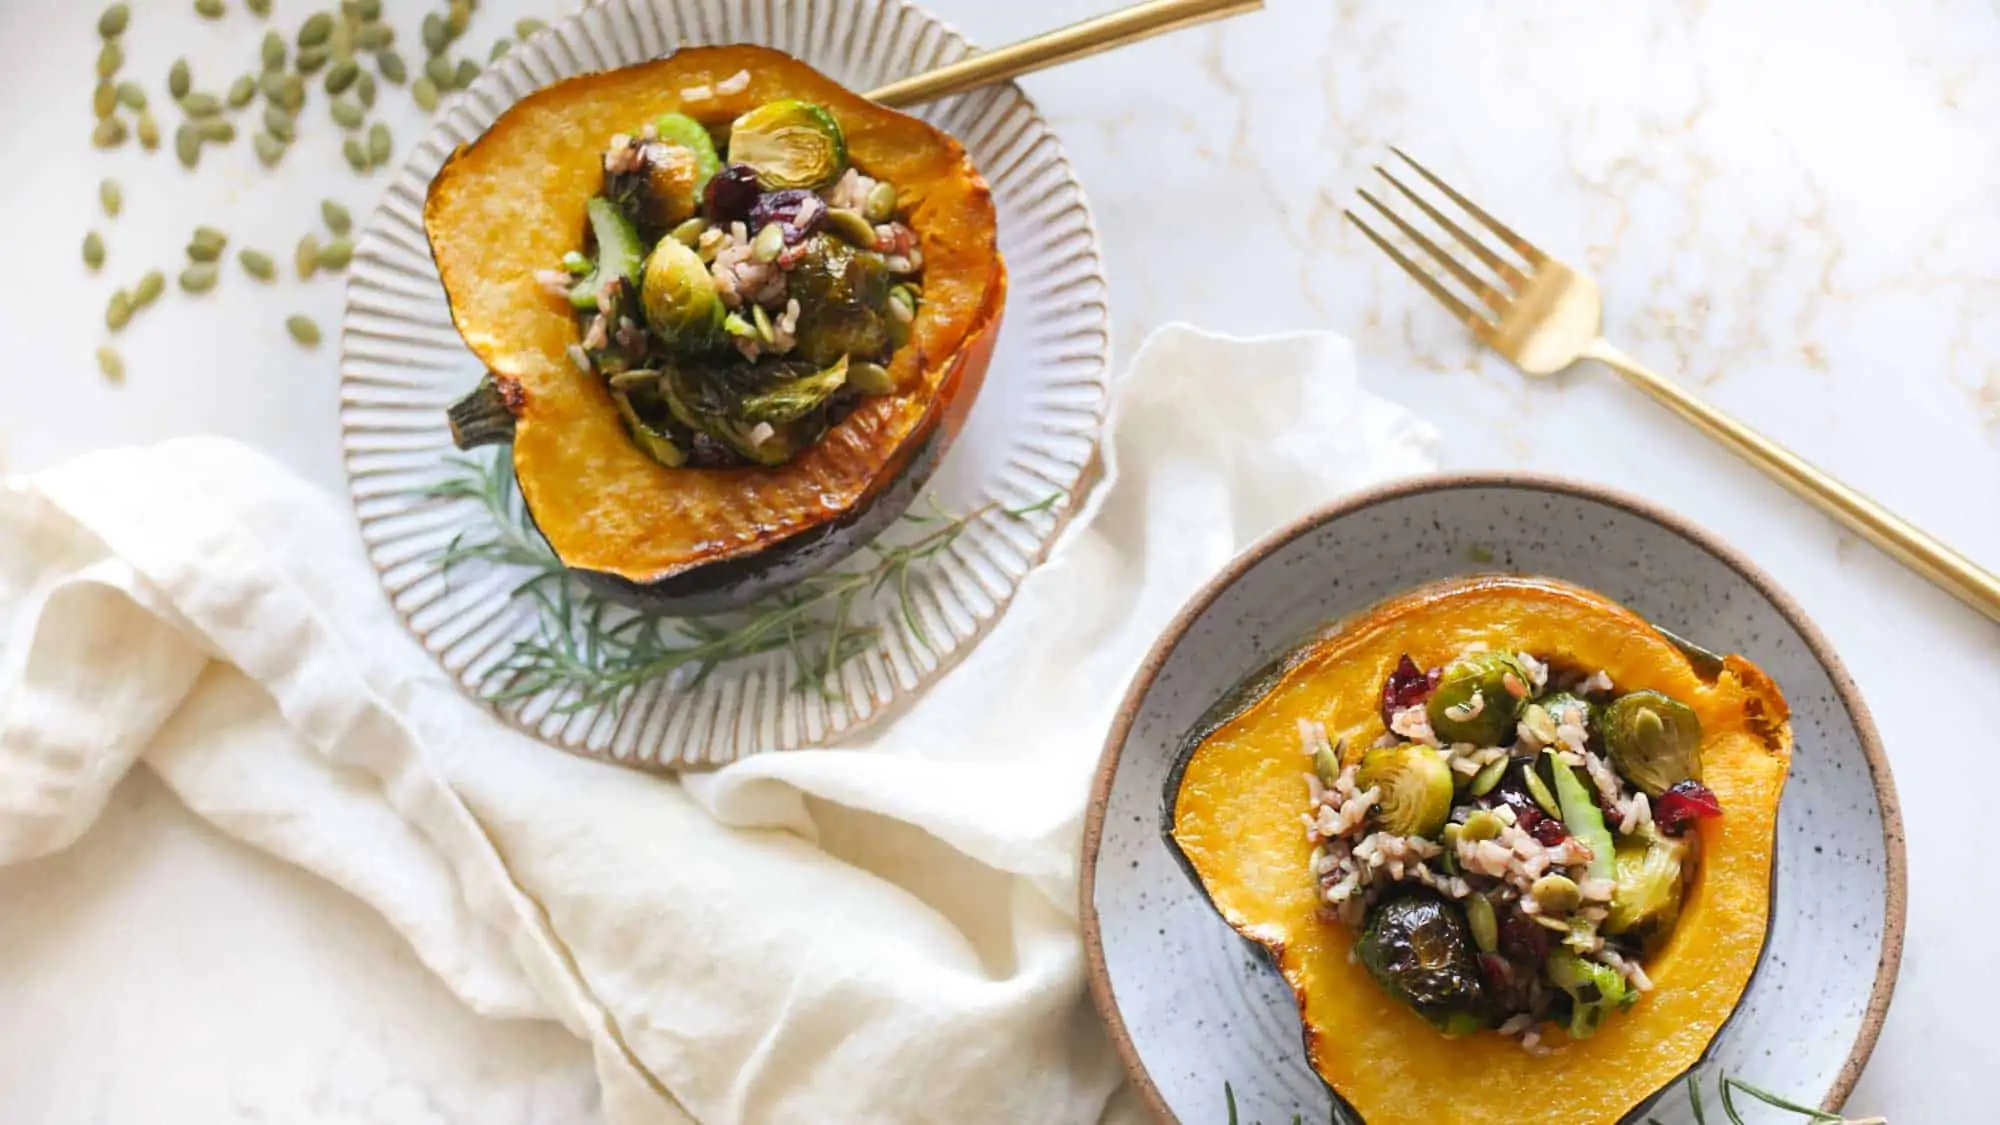 Vegan Stuffed Acorn Squash for Thanksgiving With Wild Rice Pilaf Cranberries And Pepitas Recipe